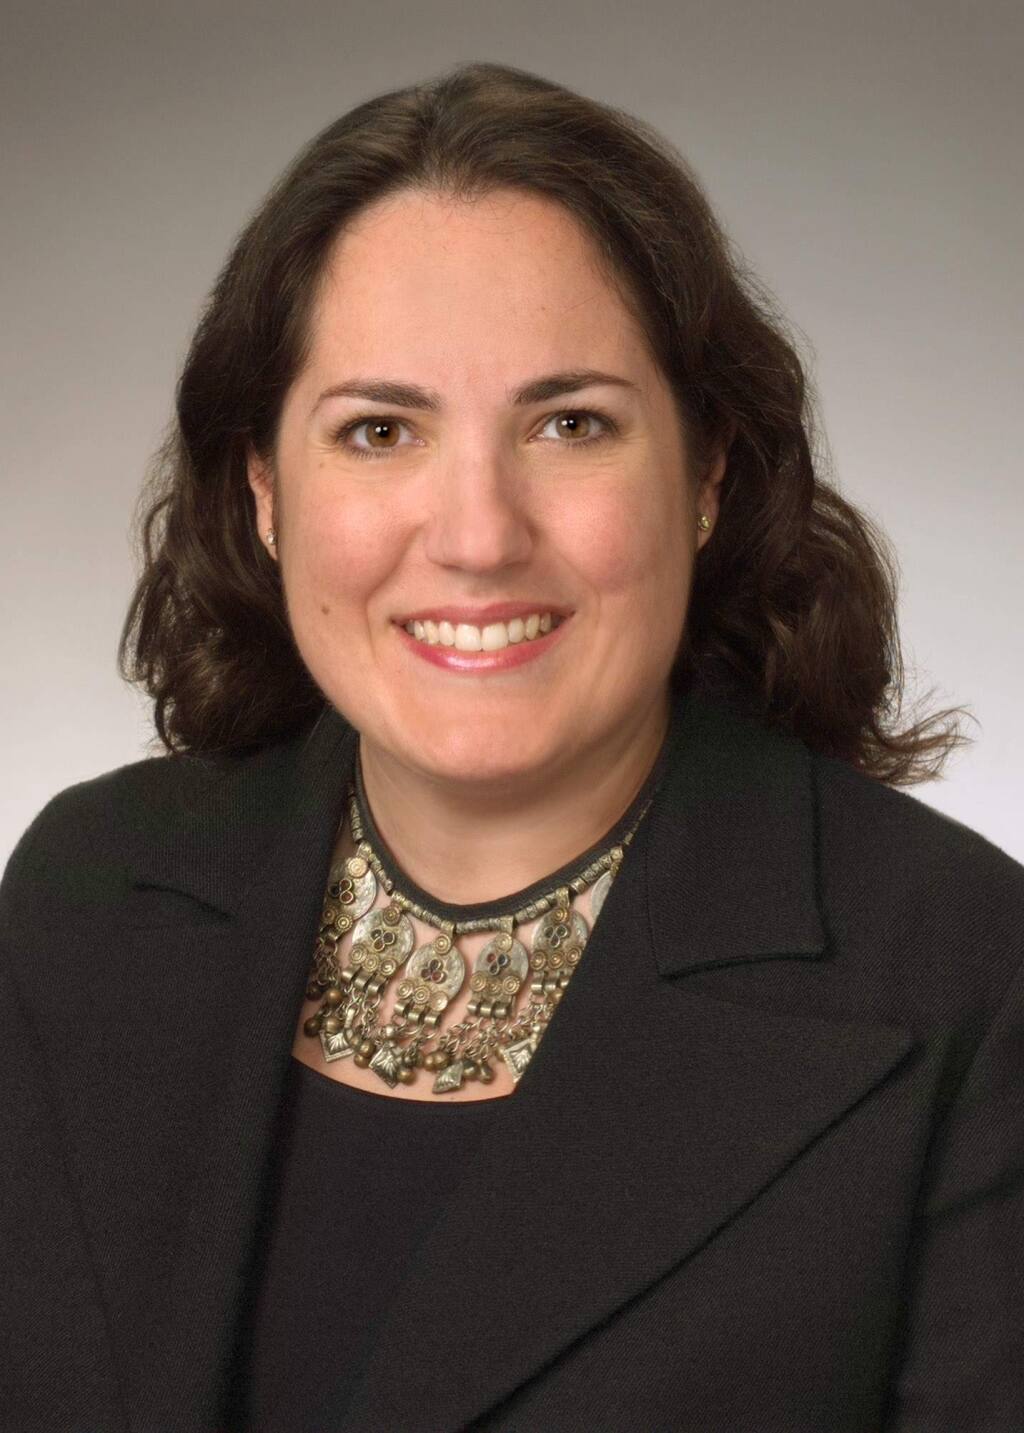 Katherine Philippakis is a St. Helena-based partner with Farella Braun + Martel, LLP, and chairs the firms Wine Industry Practice Group. (John Swanda / Swanda & Schindler Digital Photography) 2005